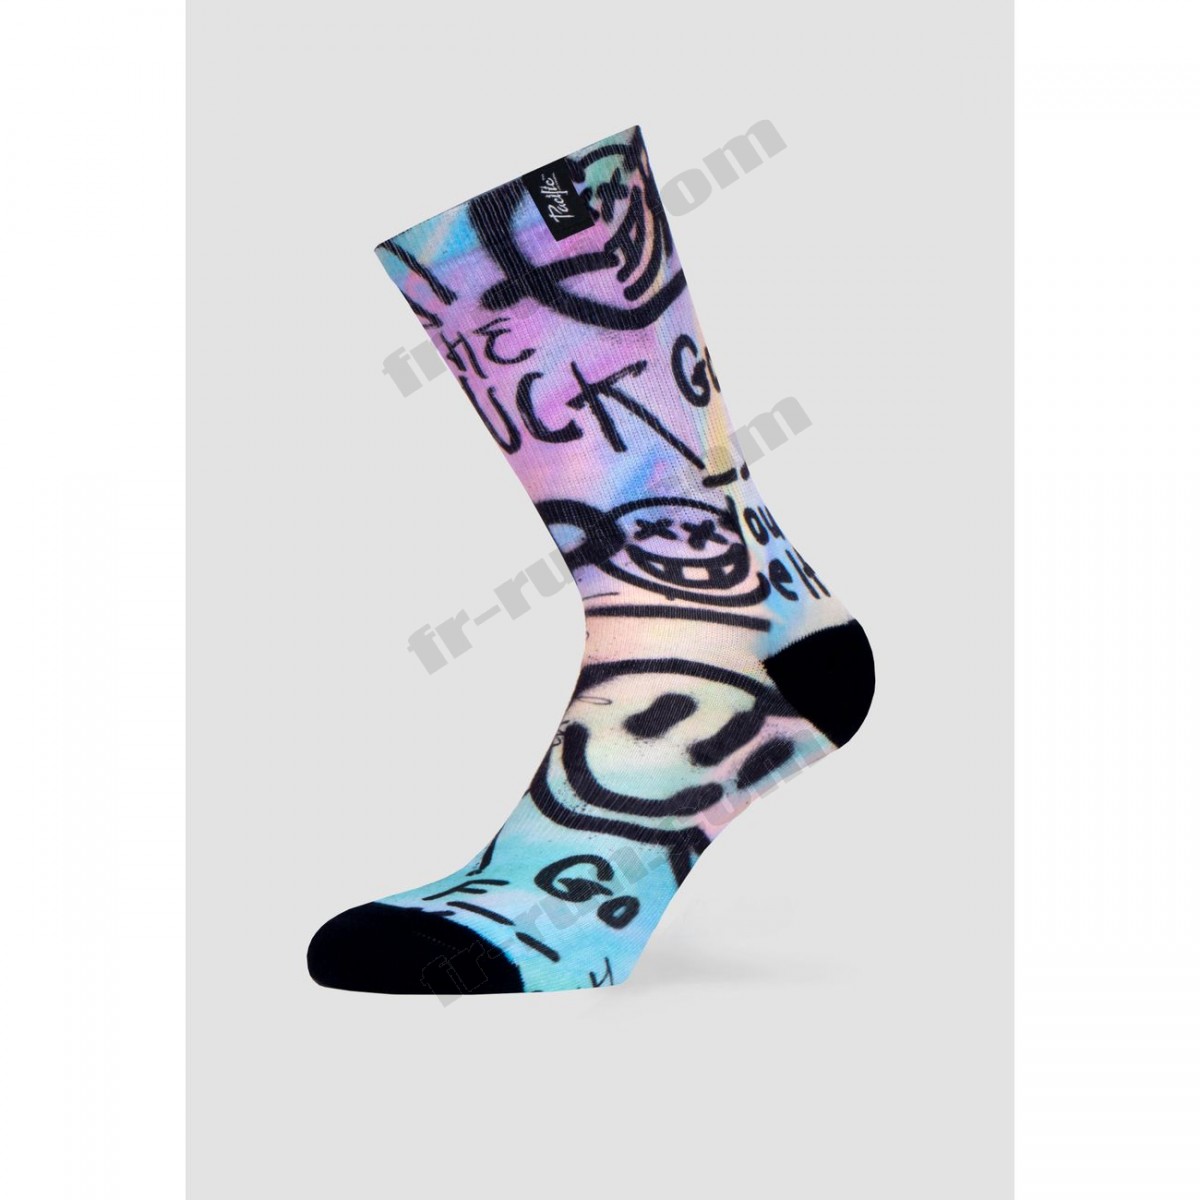 Pacific And Co/running adulte PACIFIC and CO ACID COLOR Unisex Casual Socks ◇◇◇ Pas Cher Du Tout - -0